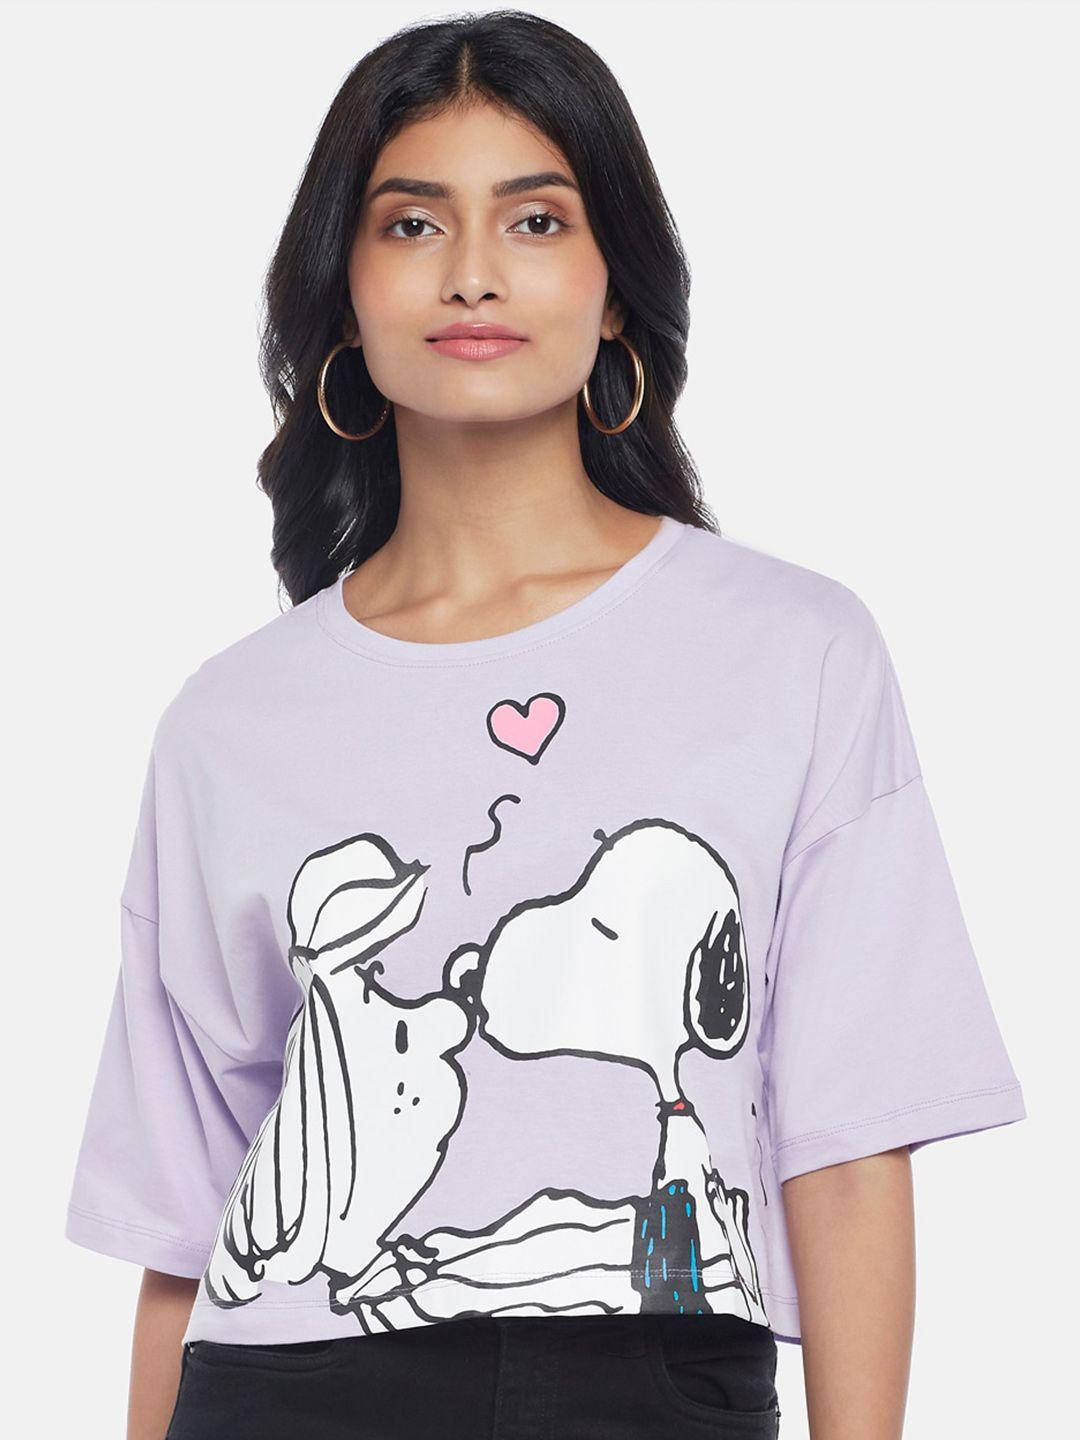 honey-by-pantaloons-snoopy-graphic-printed-cotton-crop-top